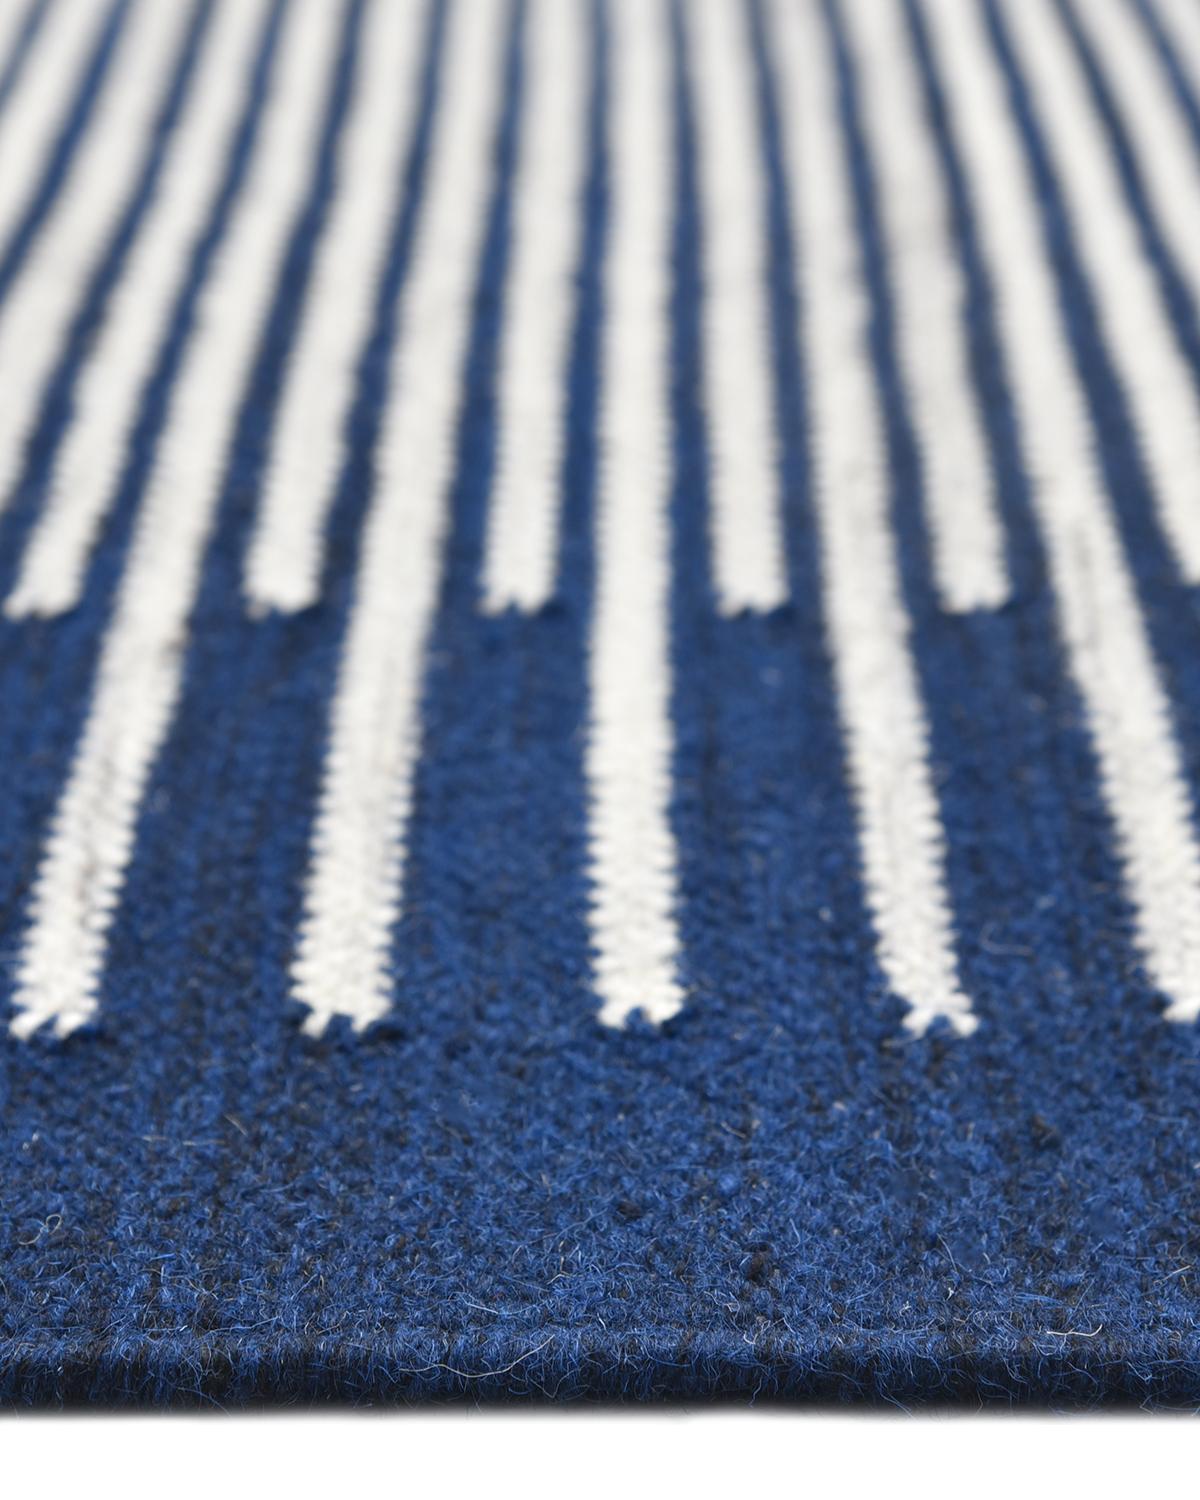 Contemporary Solo Rugs Flatweave Striped Hand Woven Blue Area Rug For Sale